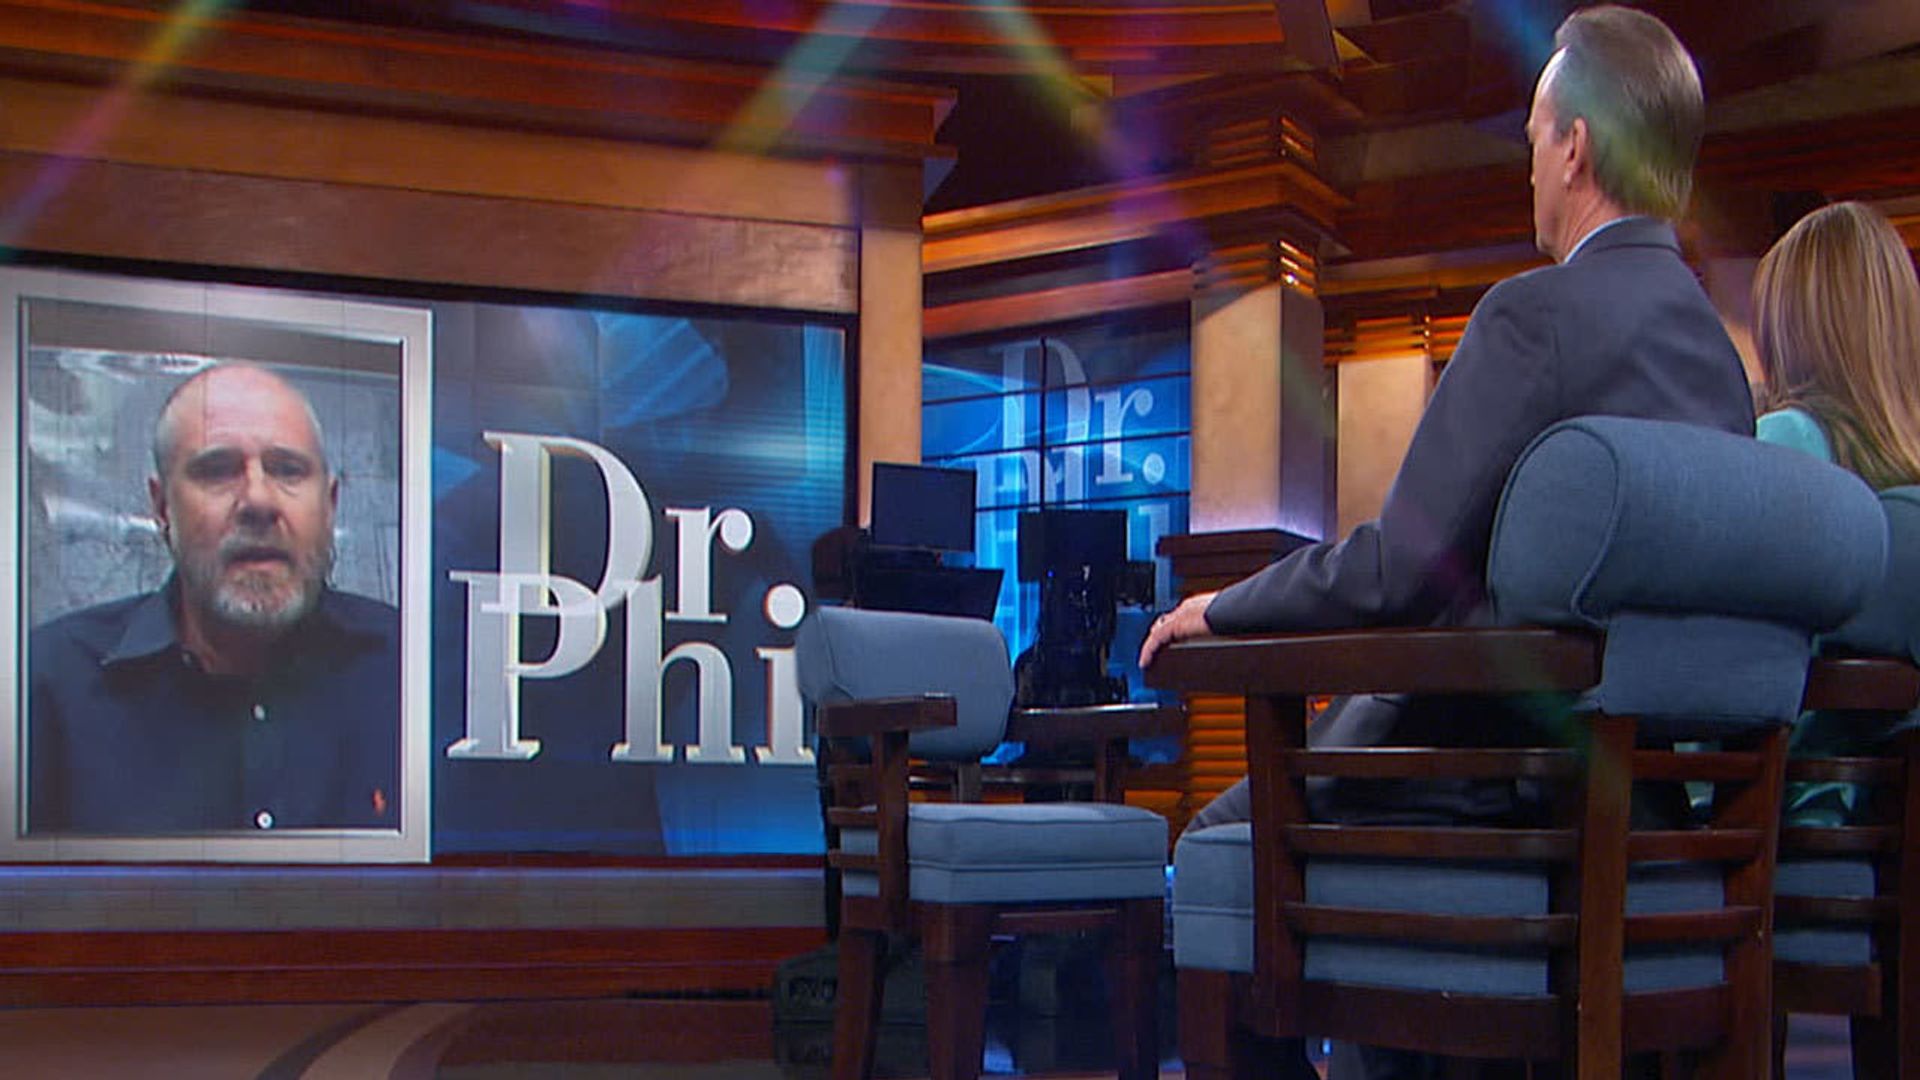 Dr. Phil background